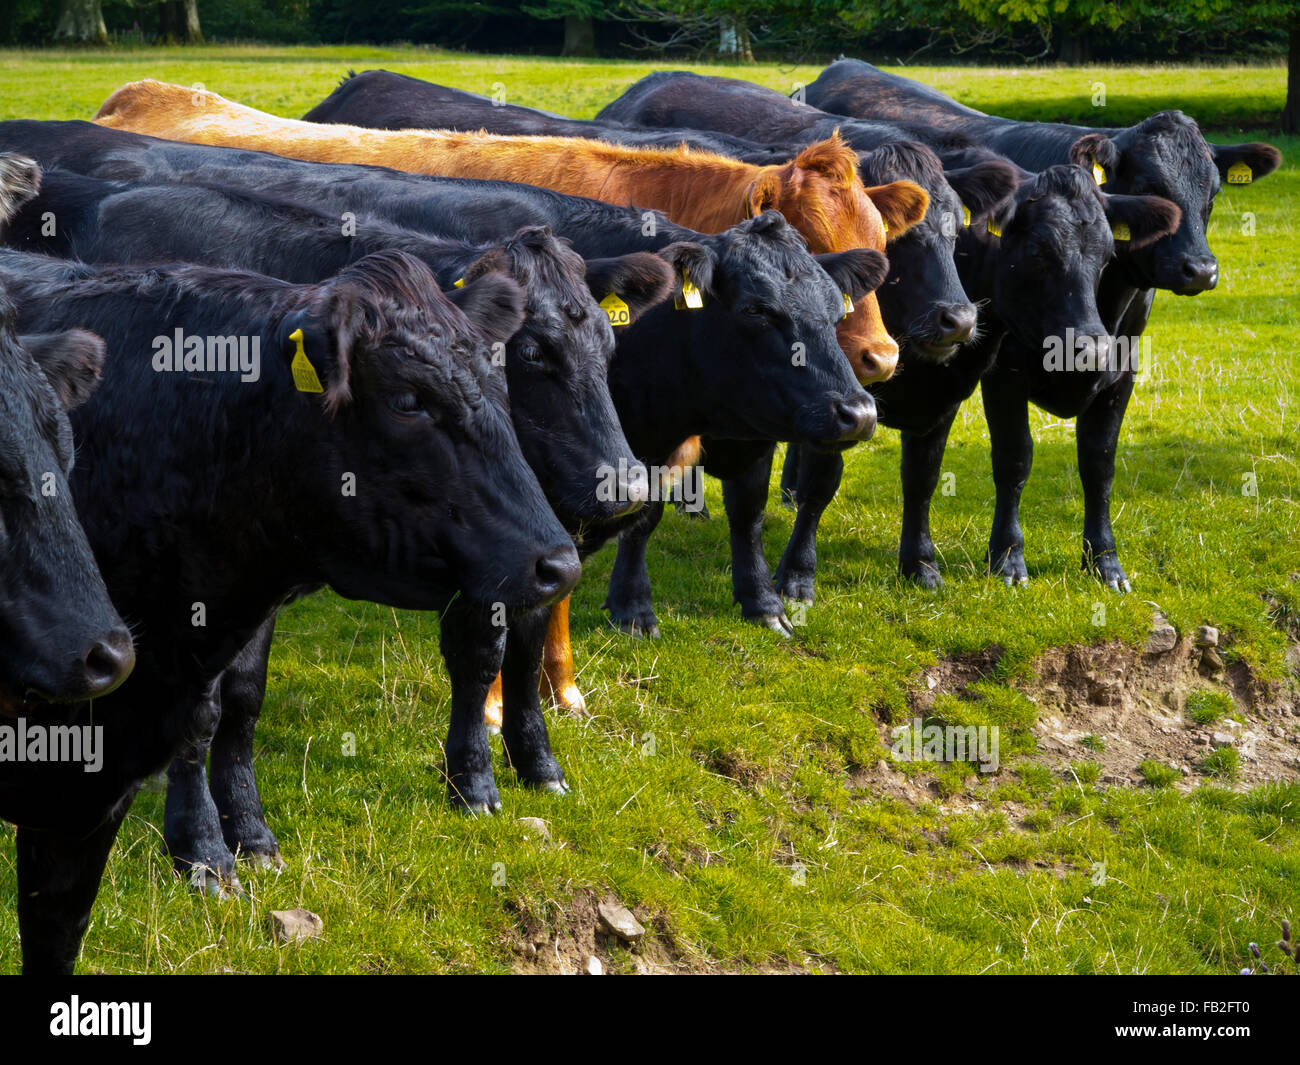 Herd of black and brown grazing cattle standing in a line in a field with identification tags attached to their ears Stock Photo